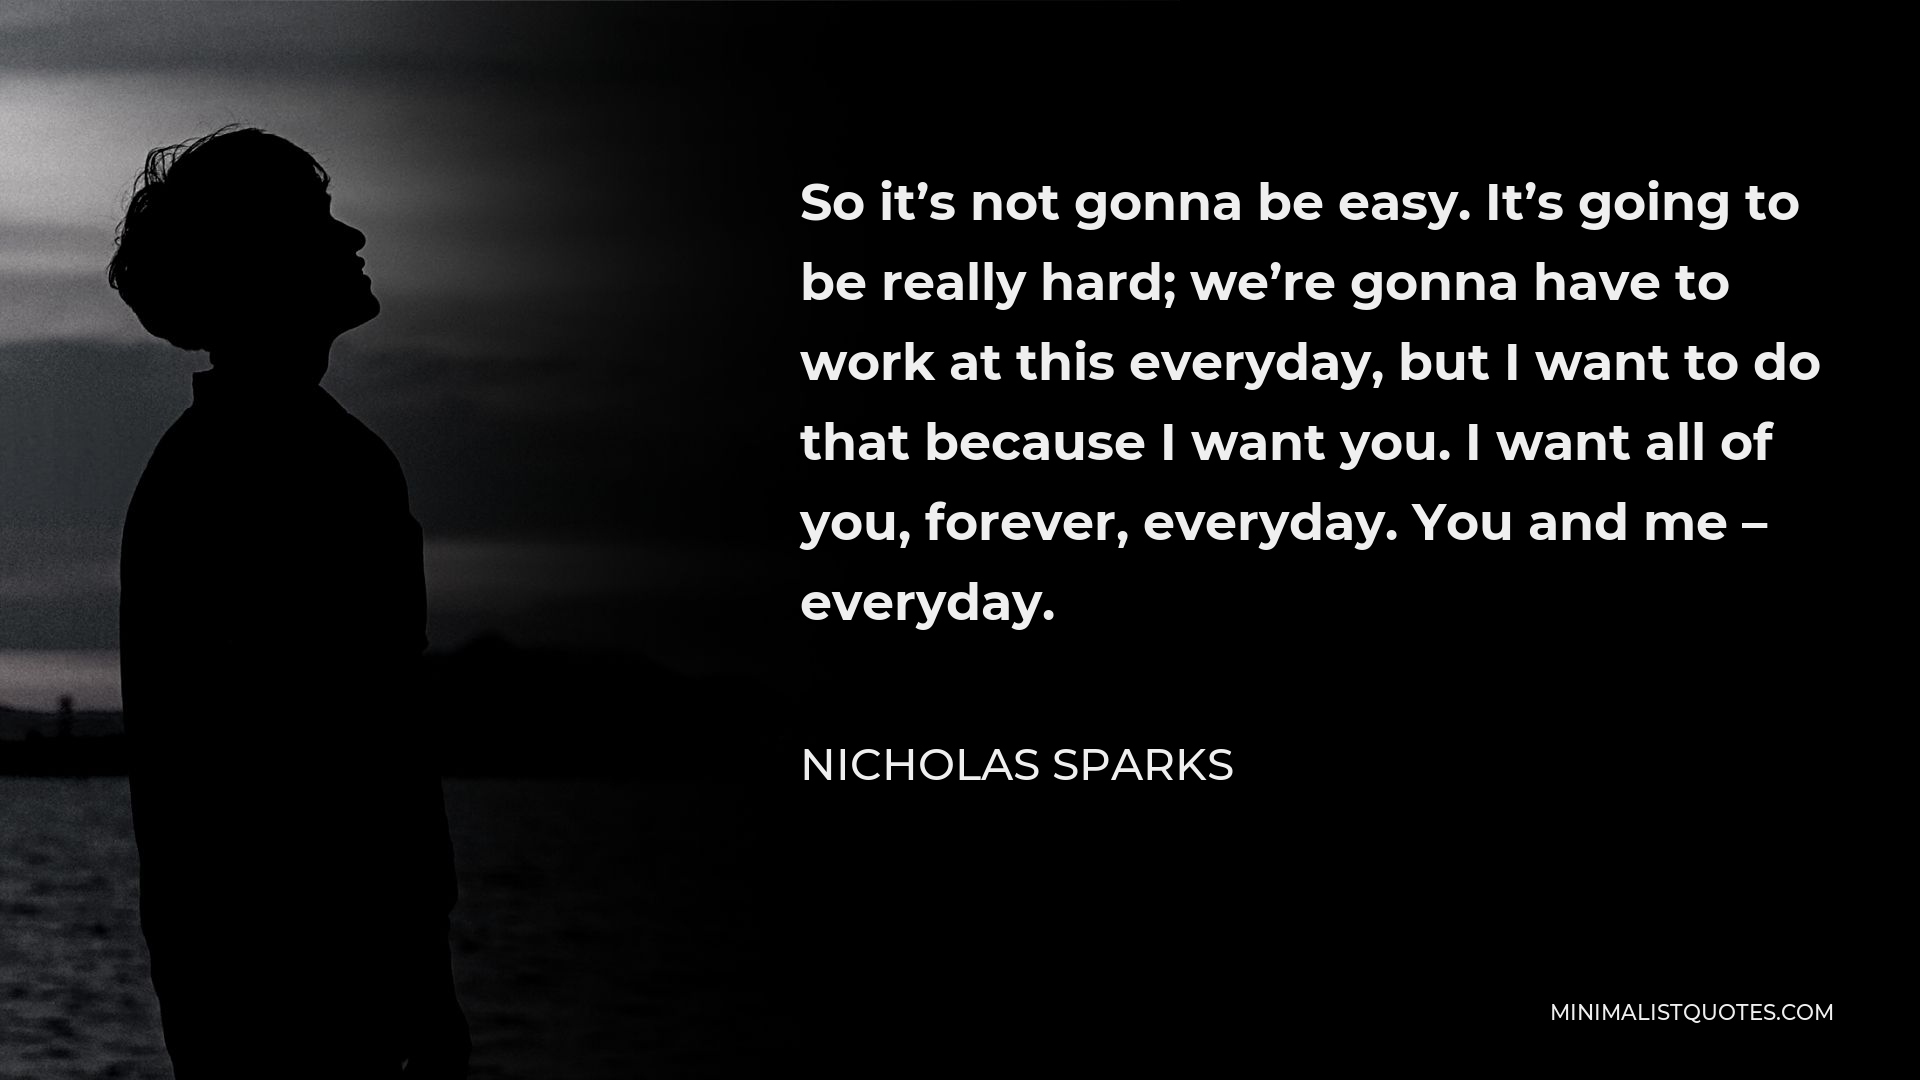 Nicholas Sparks Quote - So it’s not gonna be easy. It’s going to be really hard; we’re gonna have to work at this everyday, but I want to do that because I want you. I want all of you, forever, everyday. You and me – everyday.